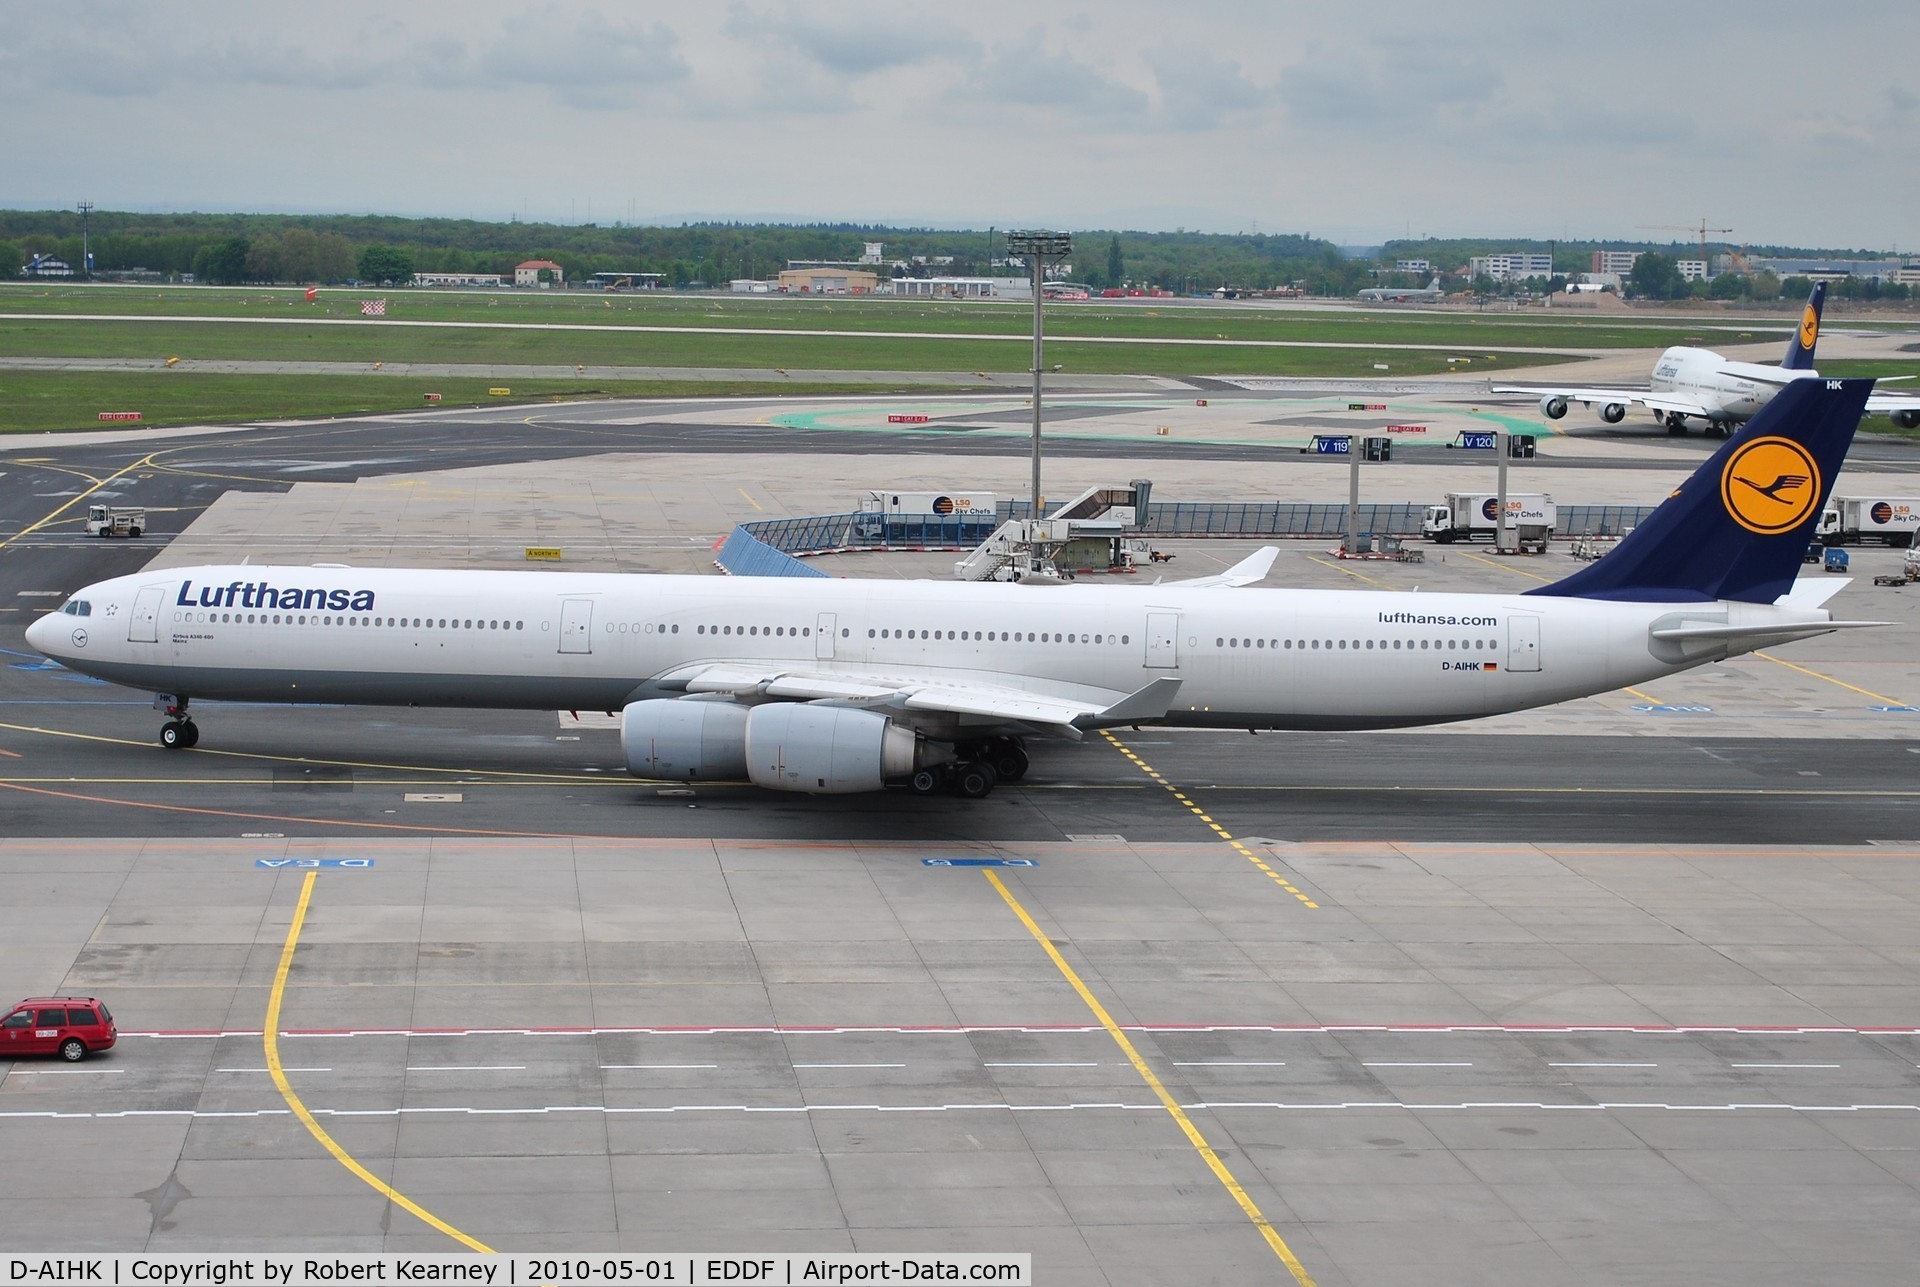 D-AIHK, 2004 Airbus A340-642 C/N 580, Lufthansa taxiing for departure